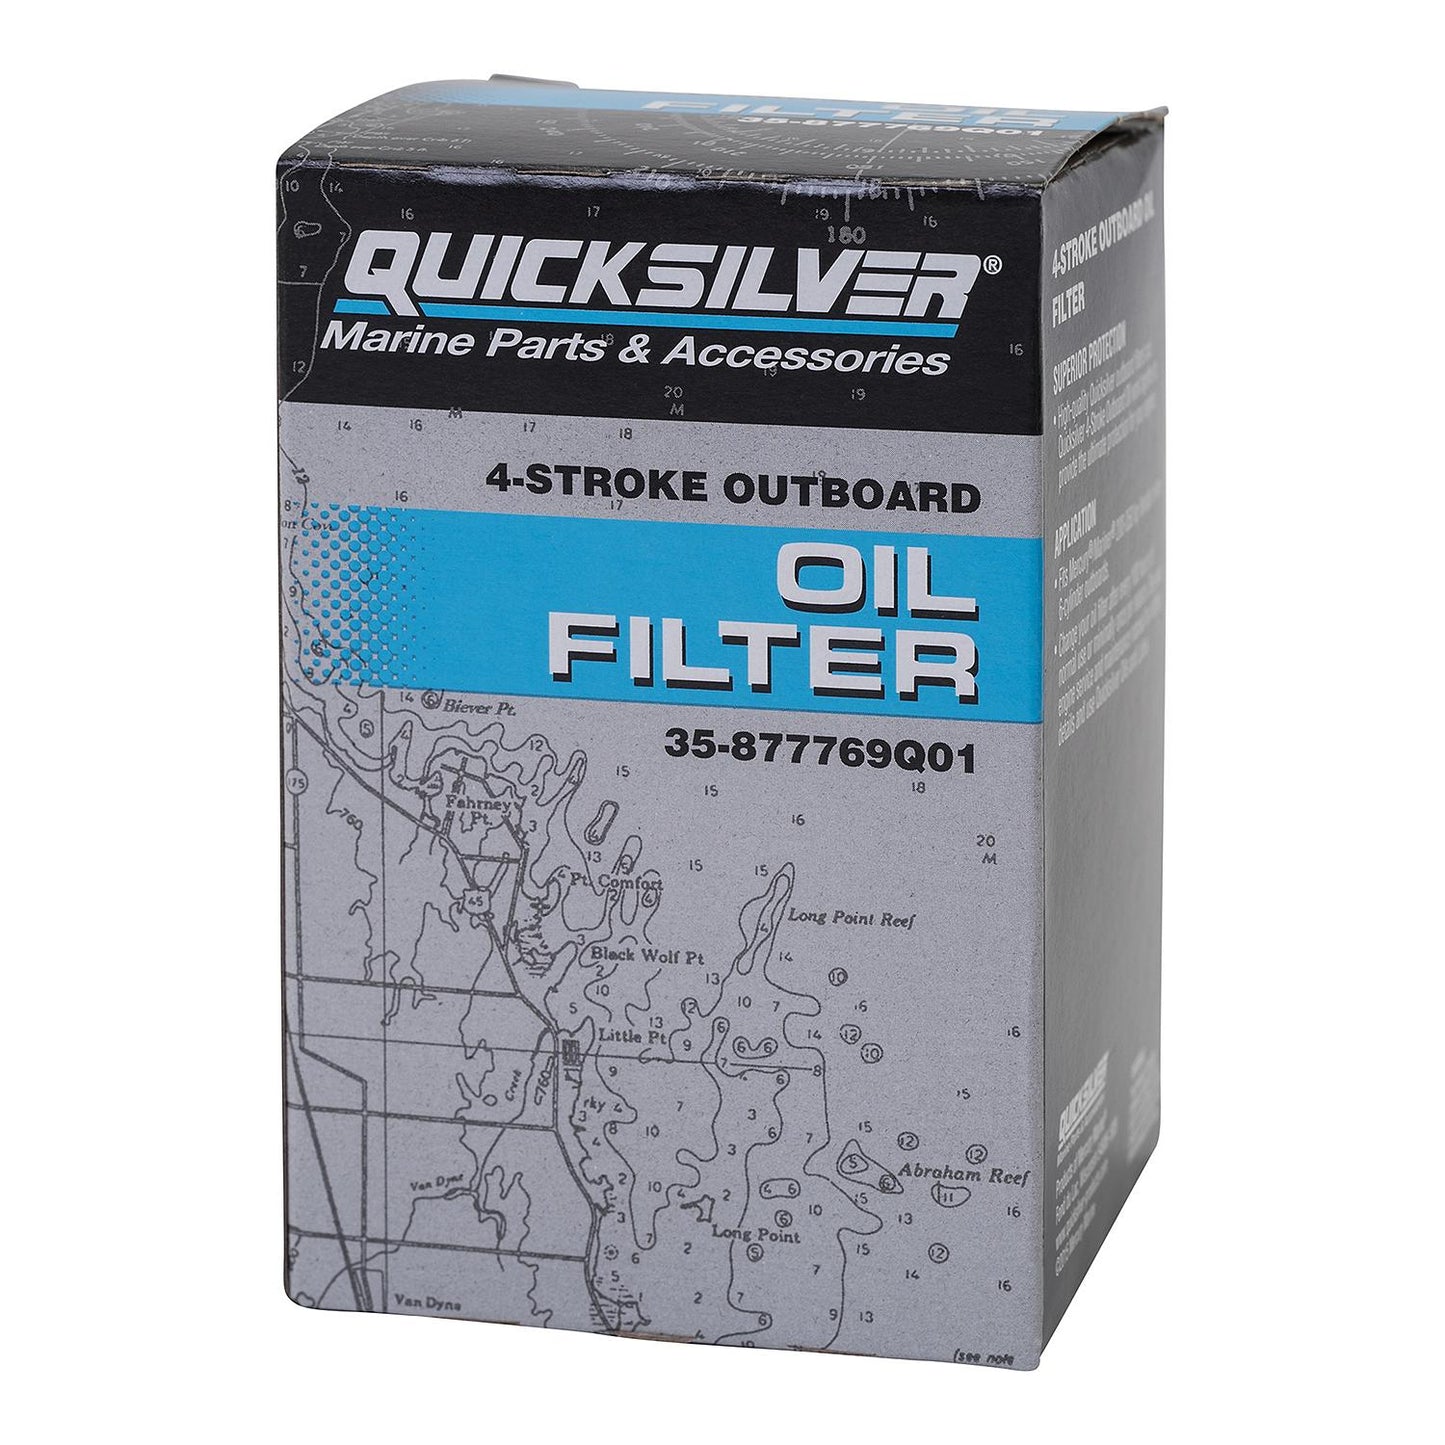 Quicksilver 877769Q01 Oil Filter for Mercury Verado Six-Cylinder Outboards